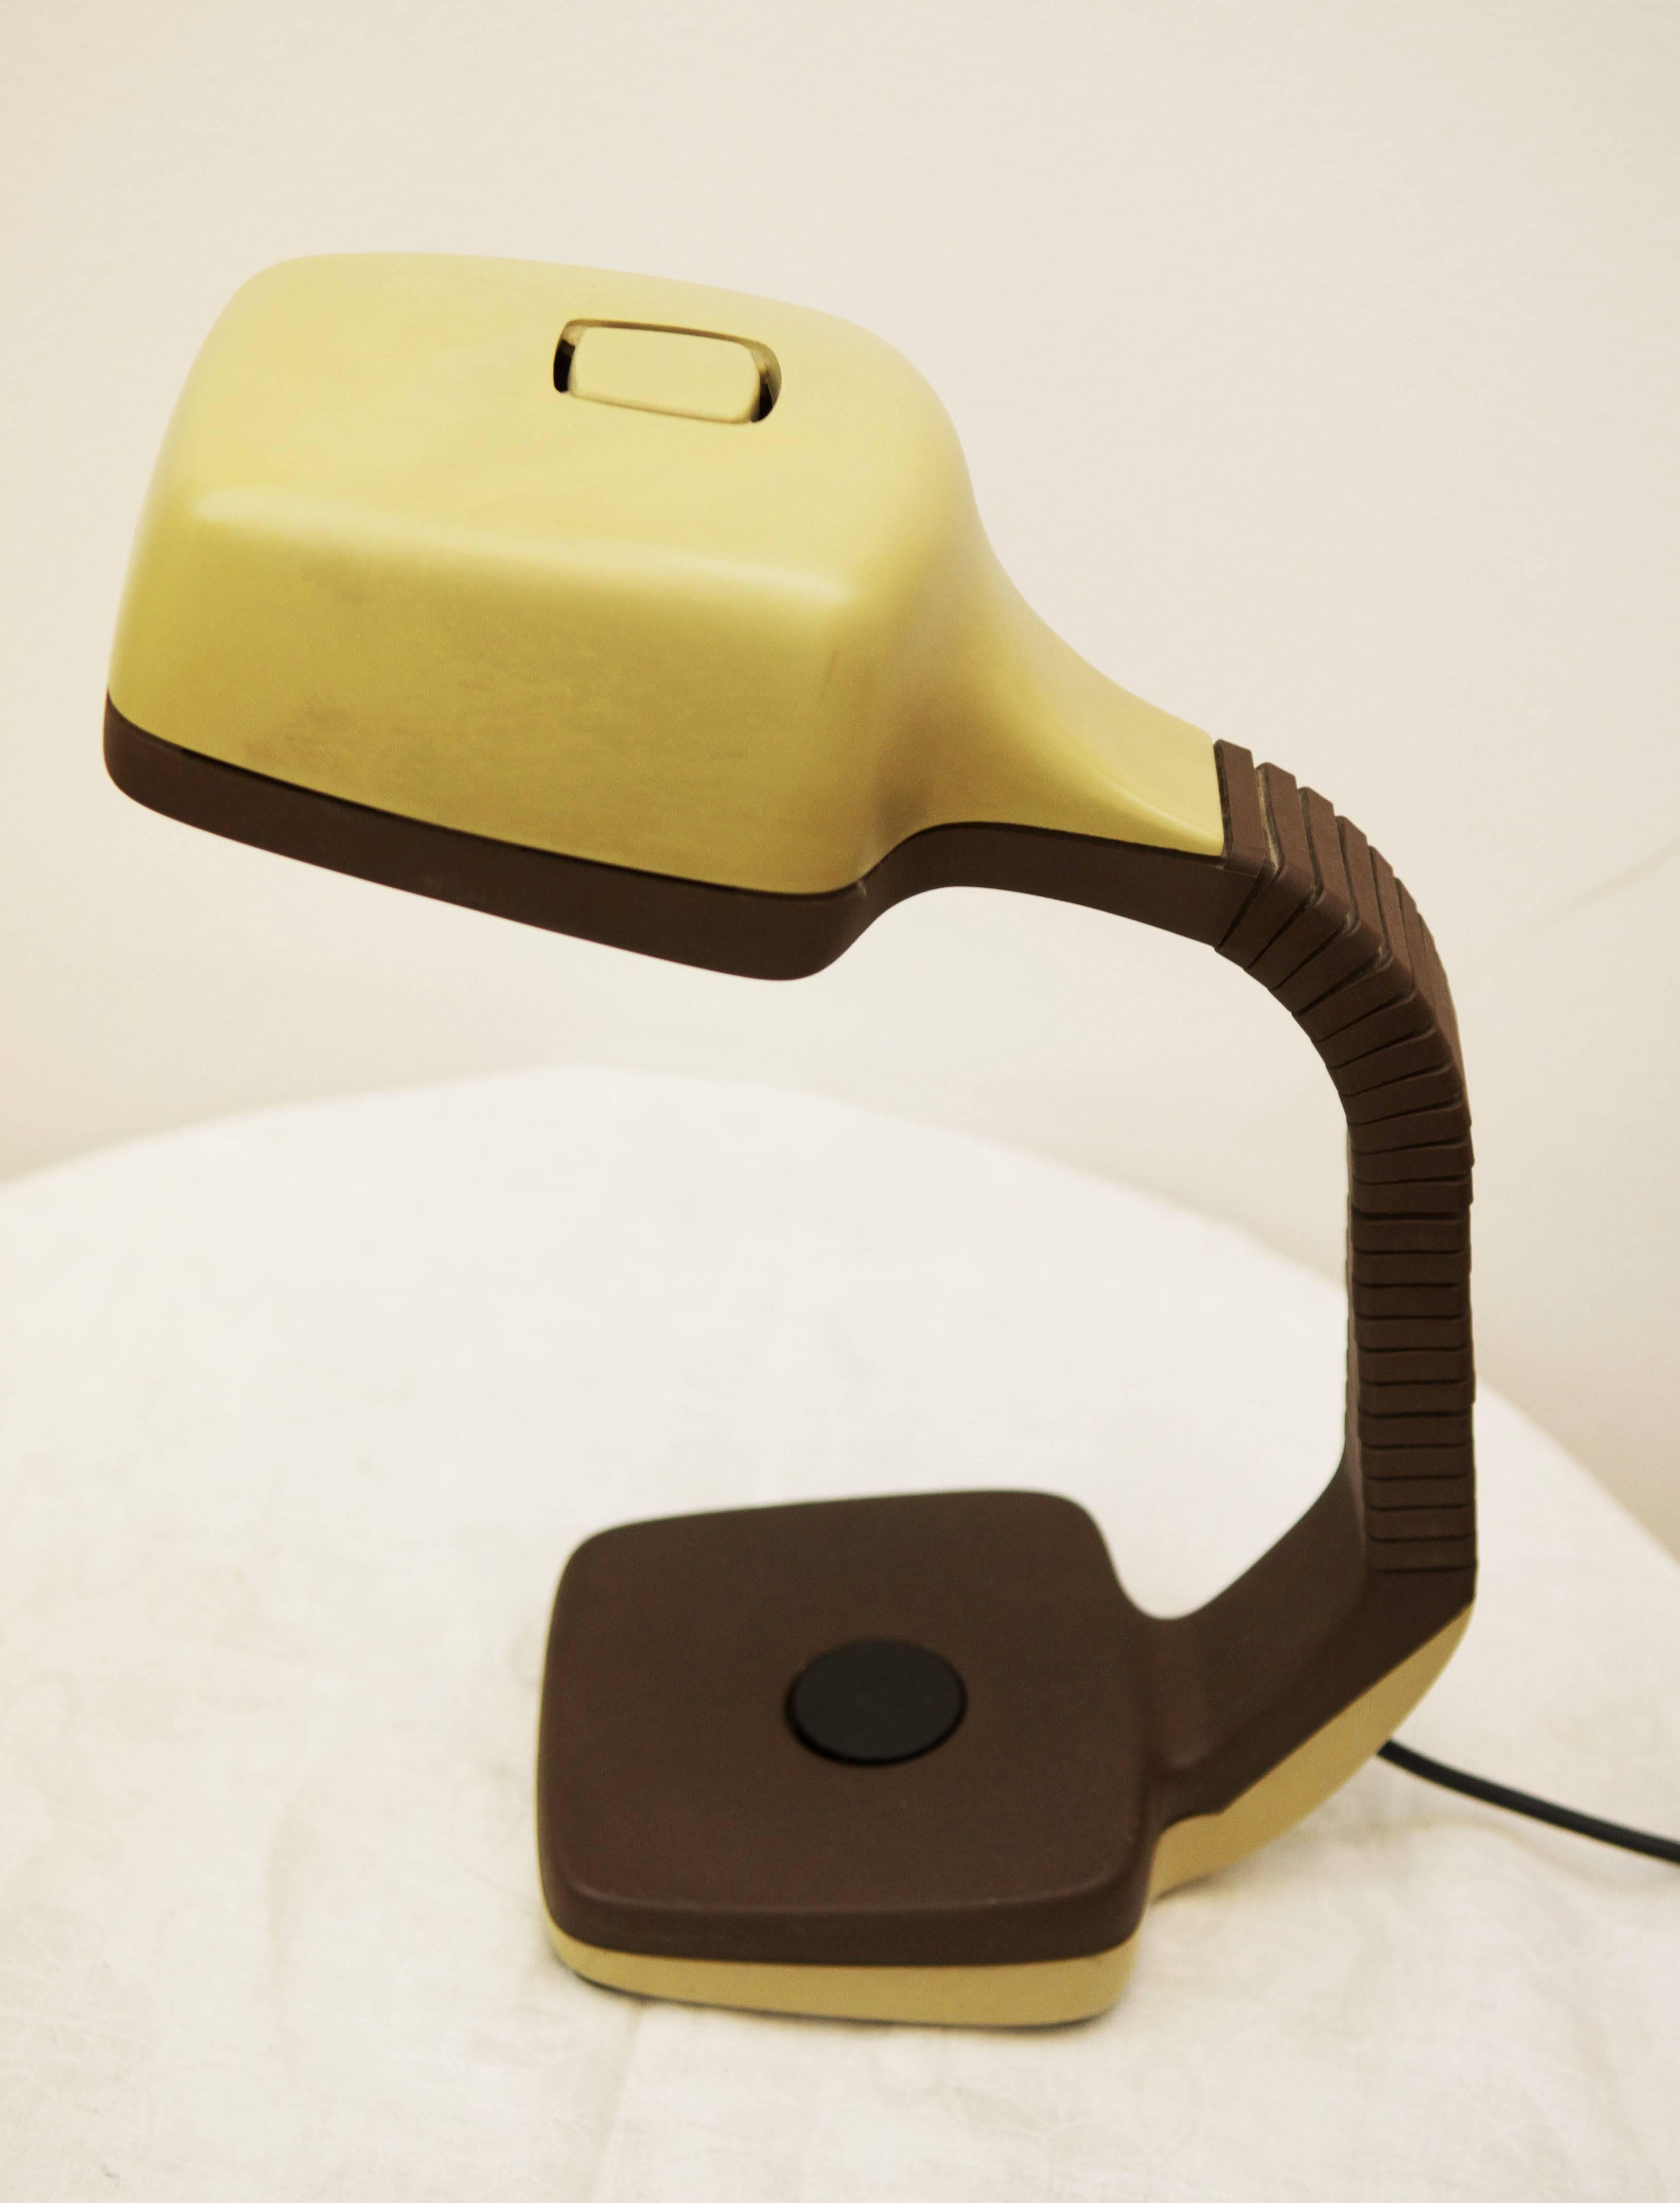 Mid-Century Modern Gooseneck Desk Lamp By Hoffmeister From the 1970s-1980s For Sale